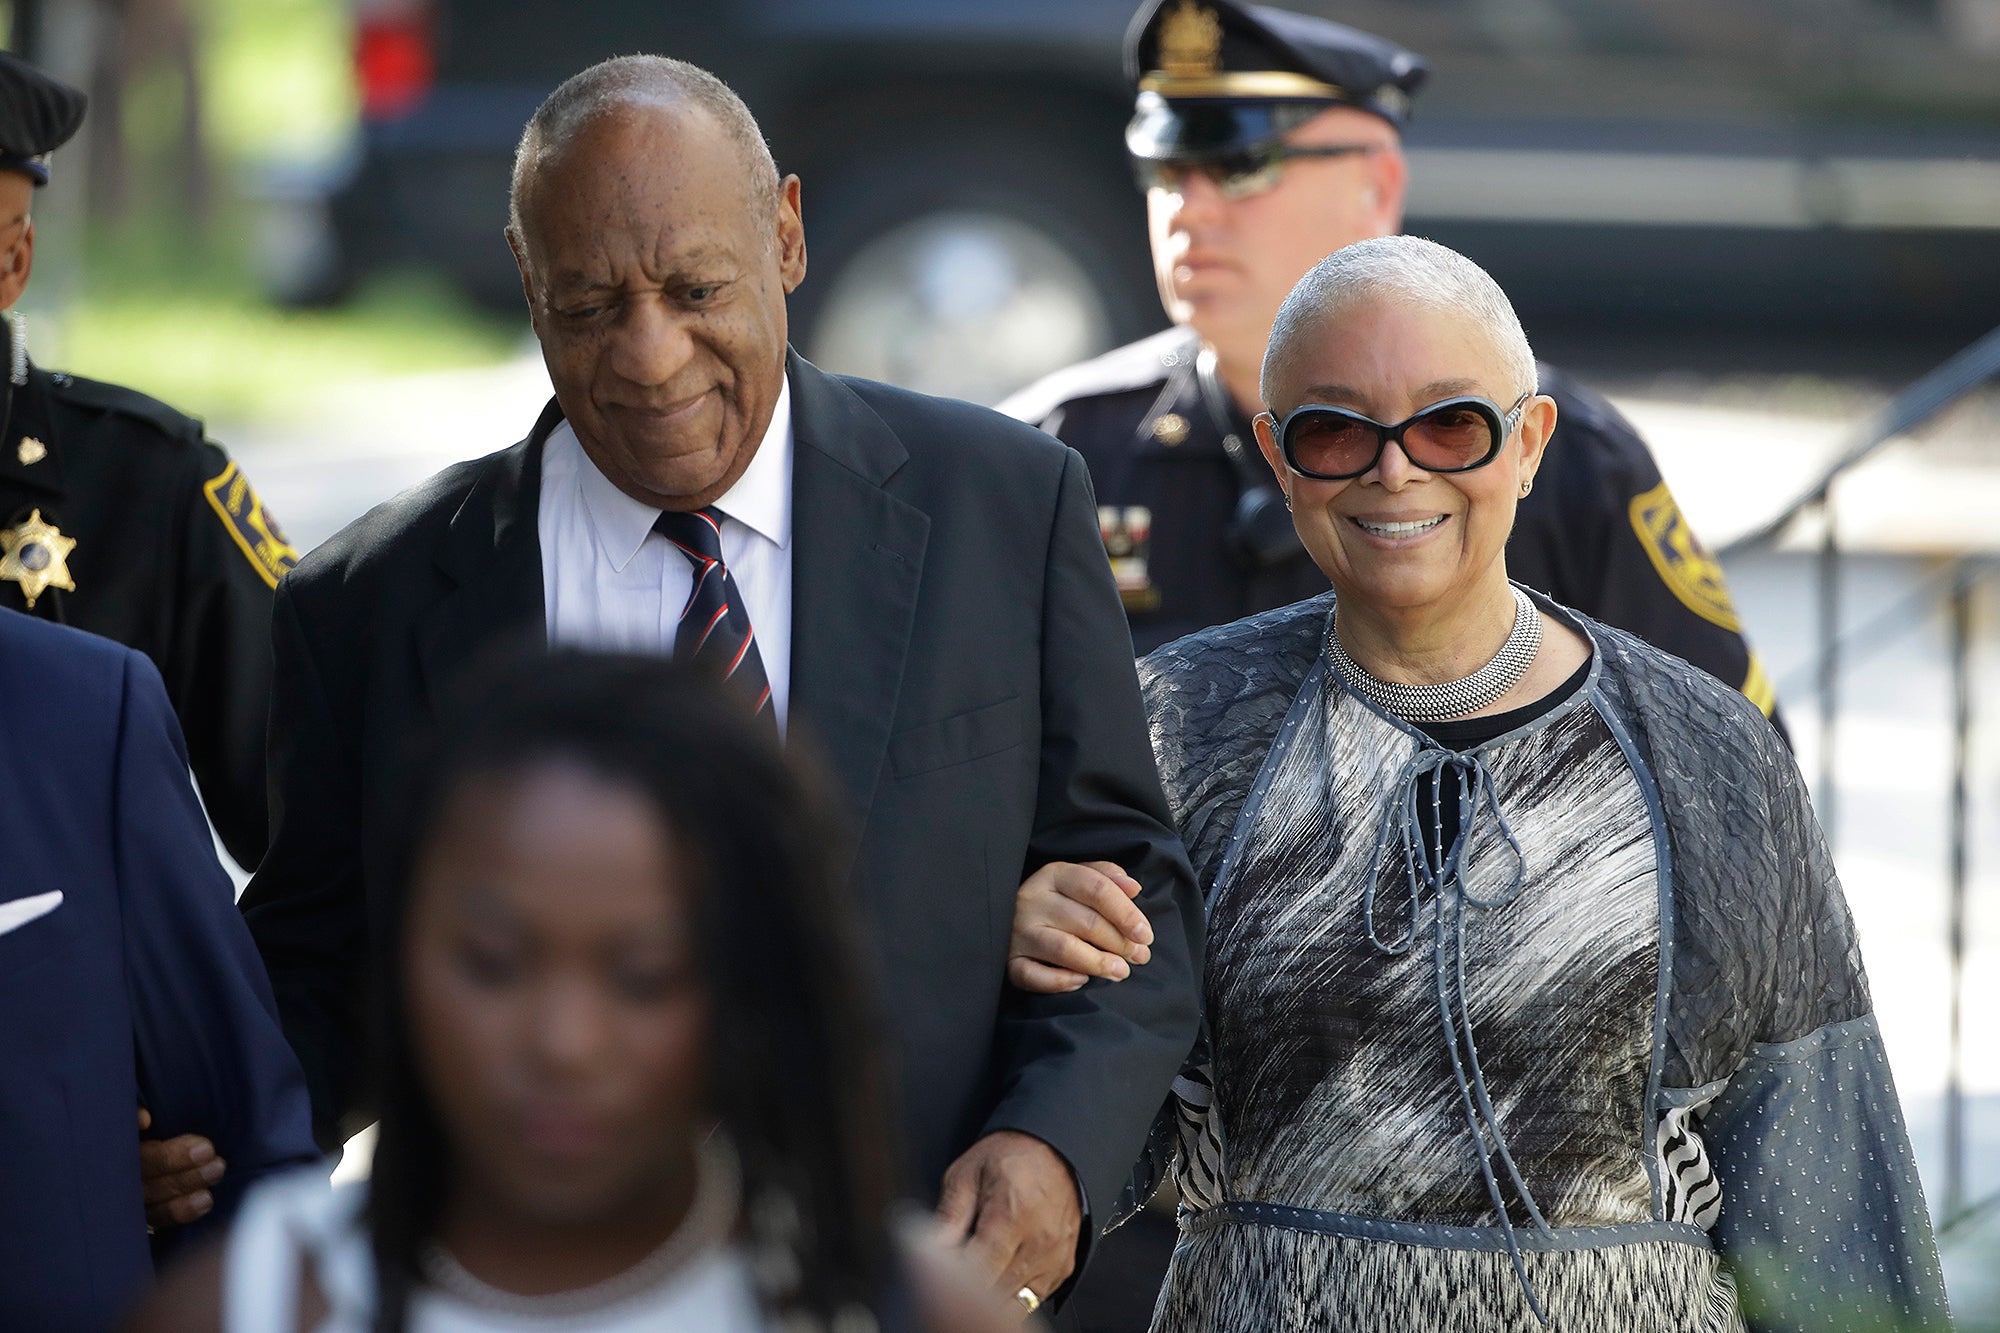 Camille Cosby Accompanies Husband Bill To Court In Sexual Assault Trial As Defense Rests